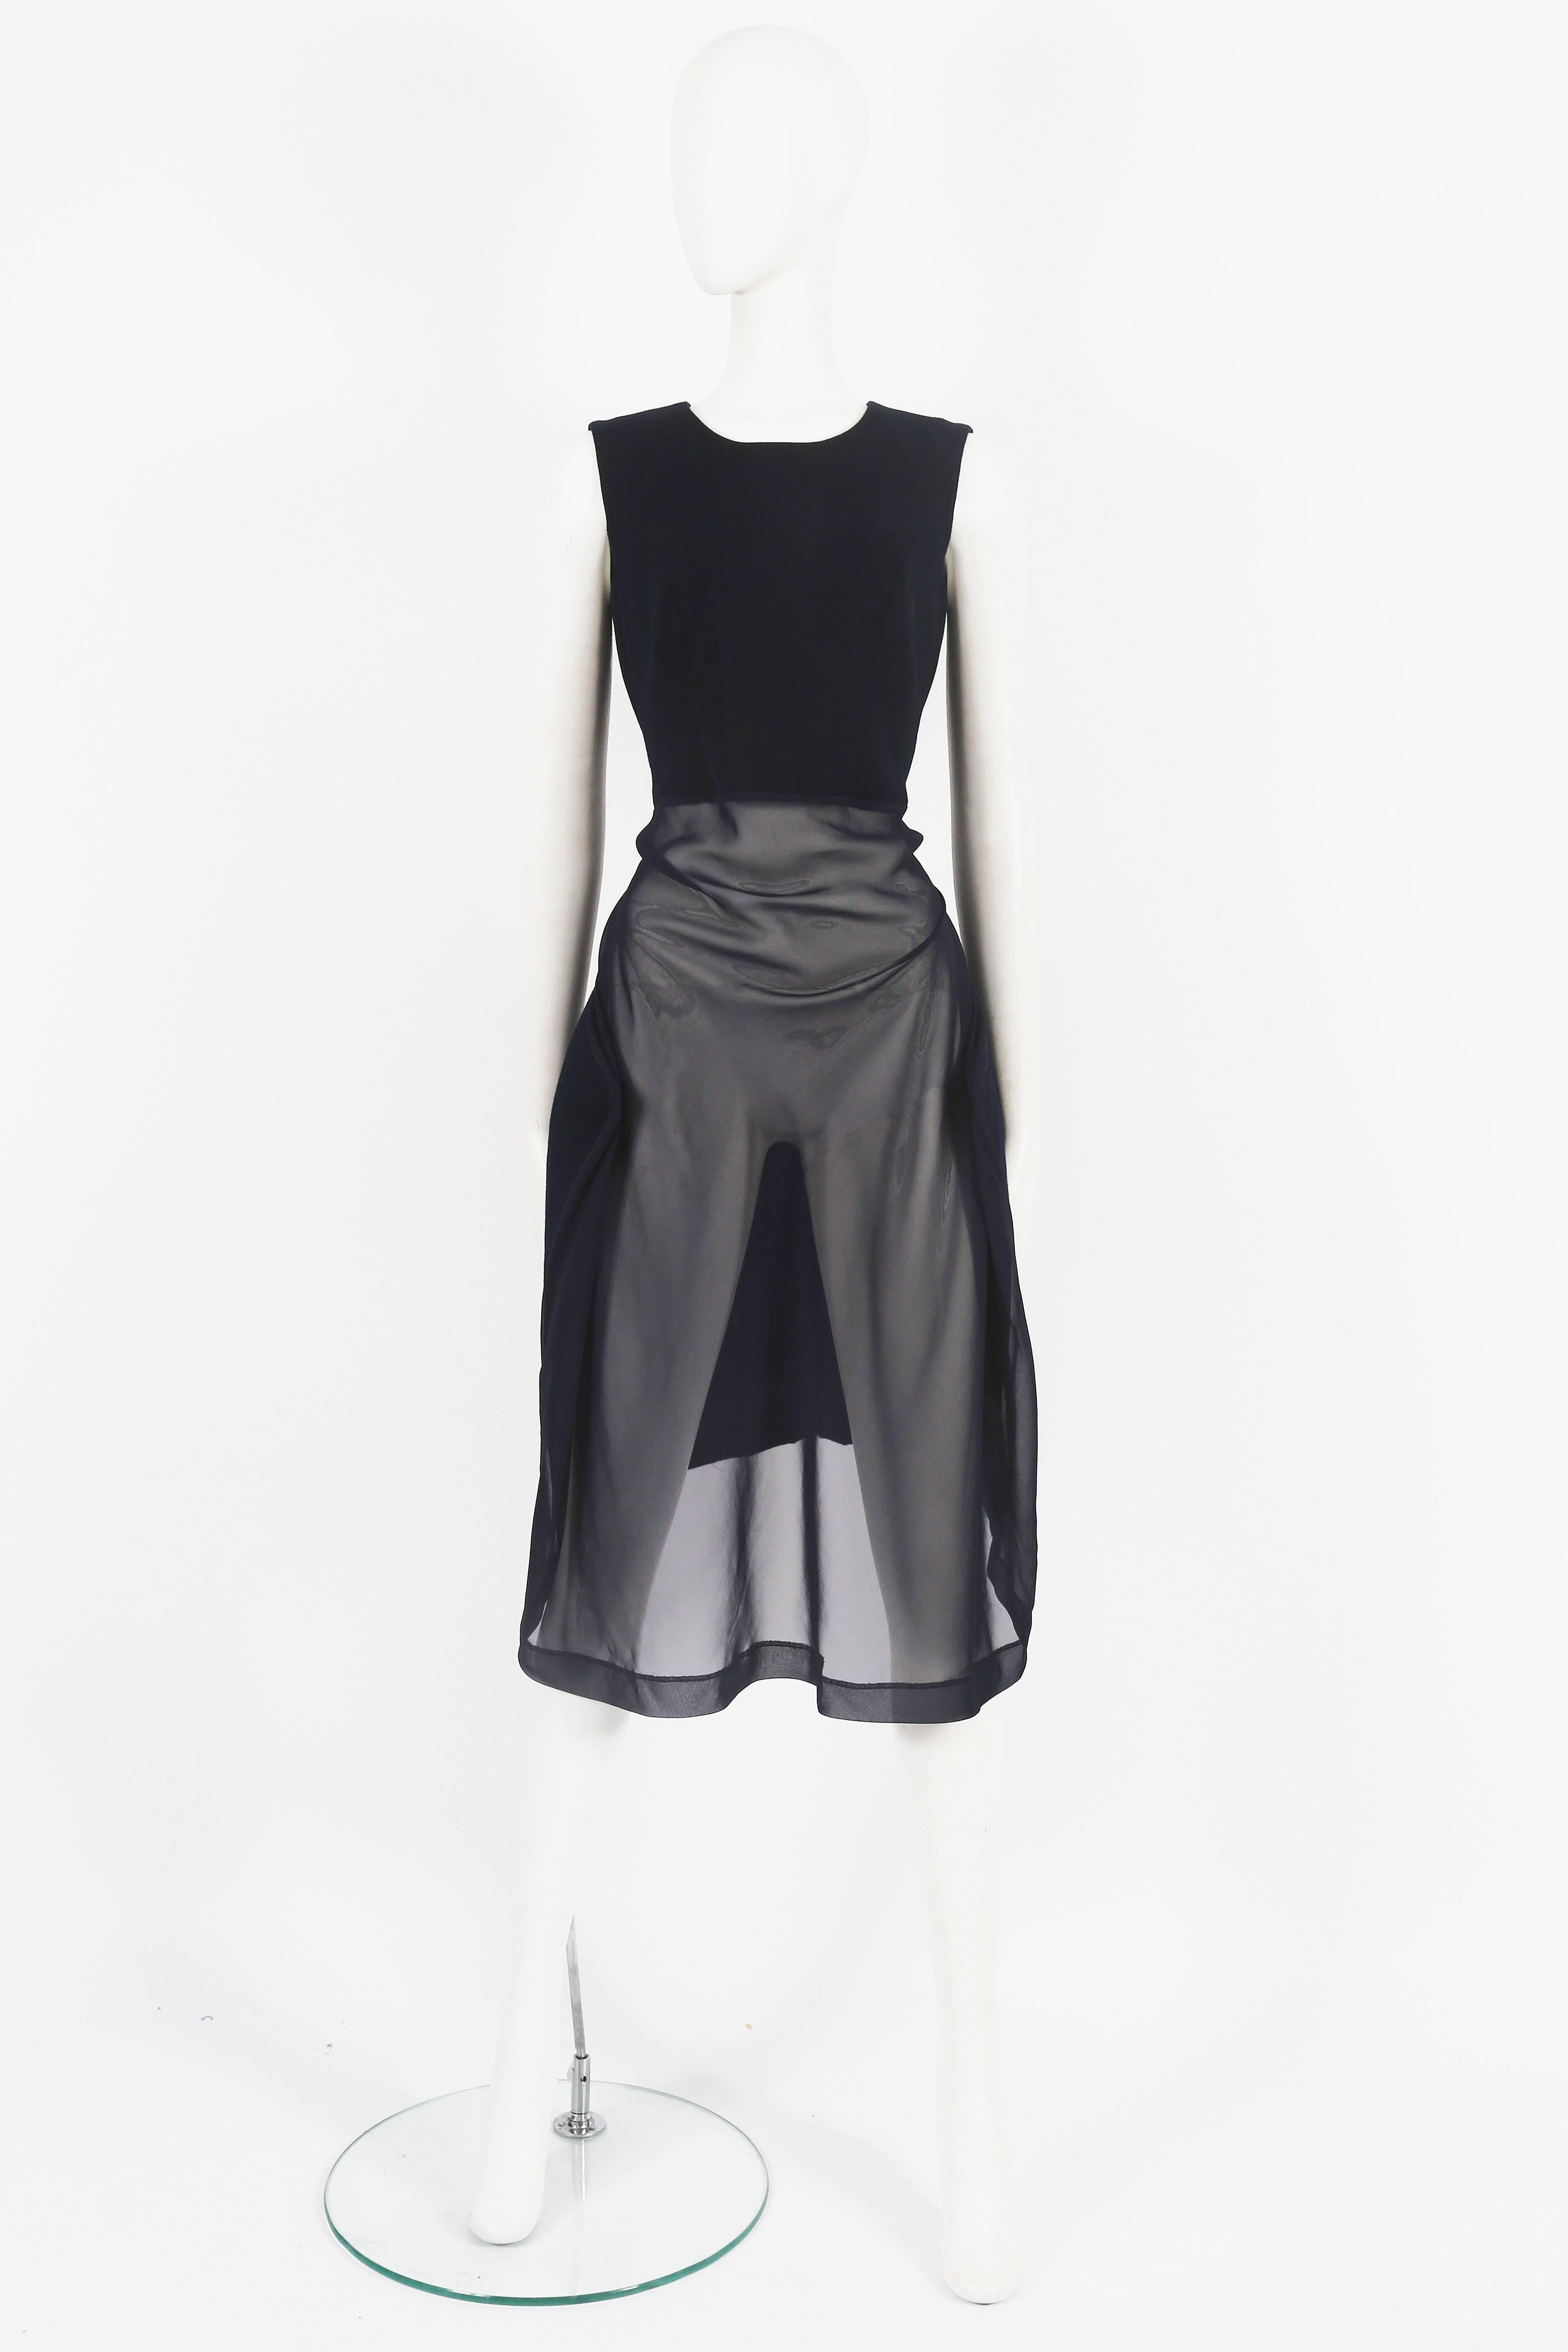 Introducing an avant-garde Comme des Garcons deconstructed wool and chiffon dress, an exceptional piece from the autumn-winter 1997 collection. This dress exemplifies the brand's innovative design and unconventional approach to fashion.

The